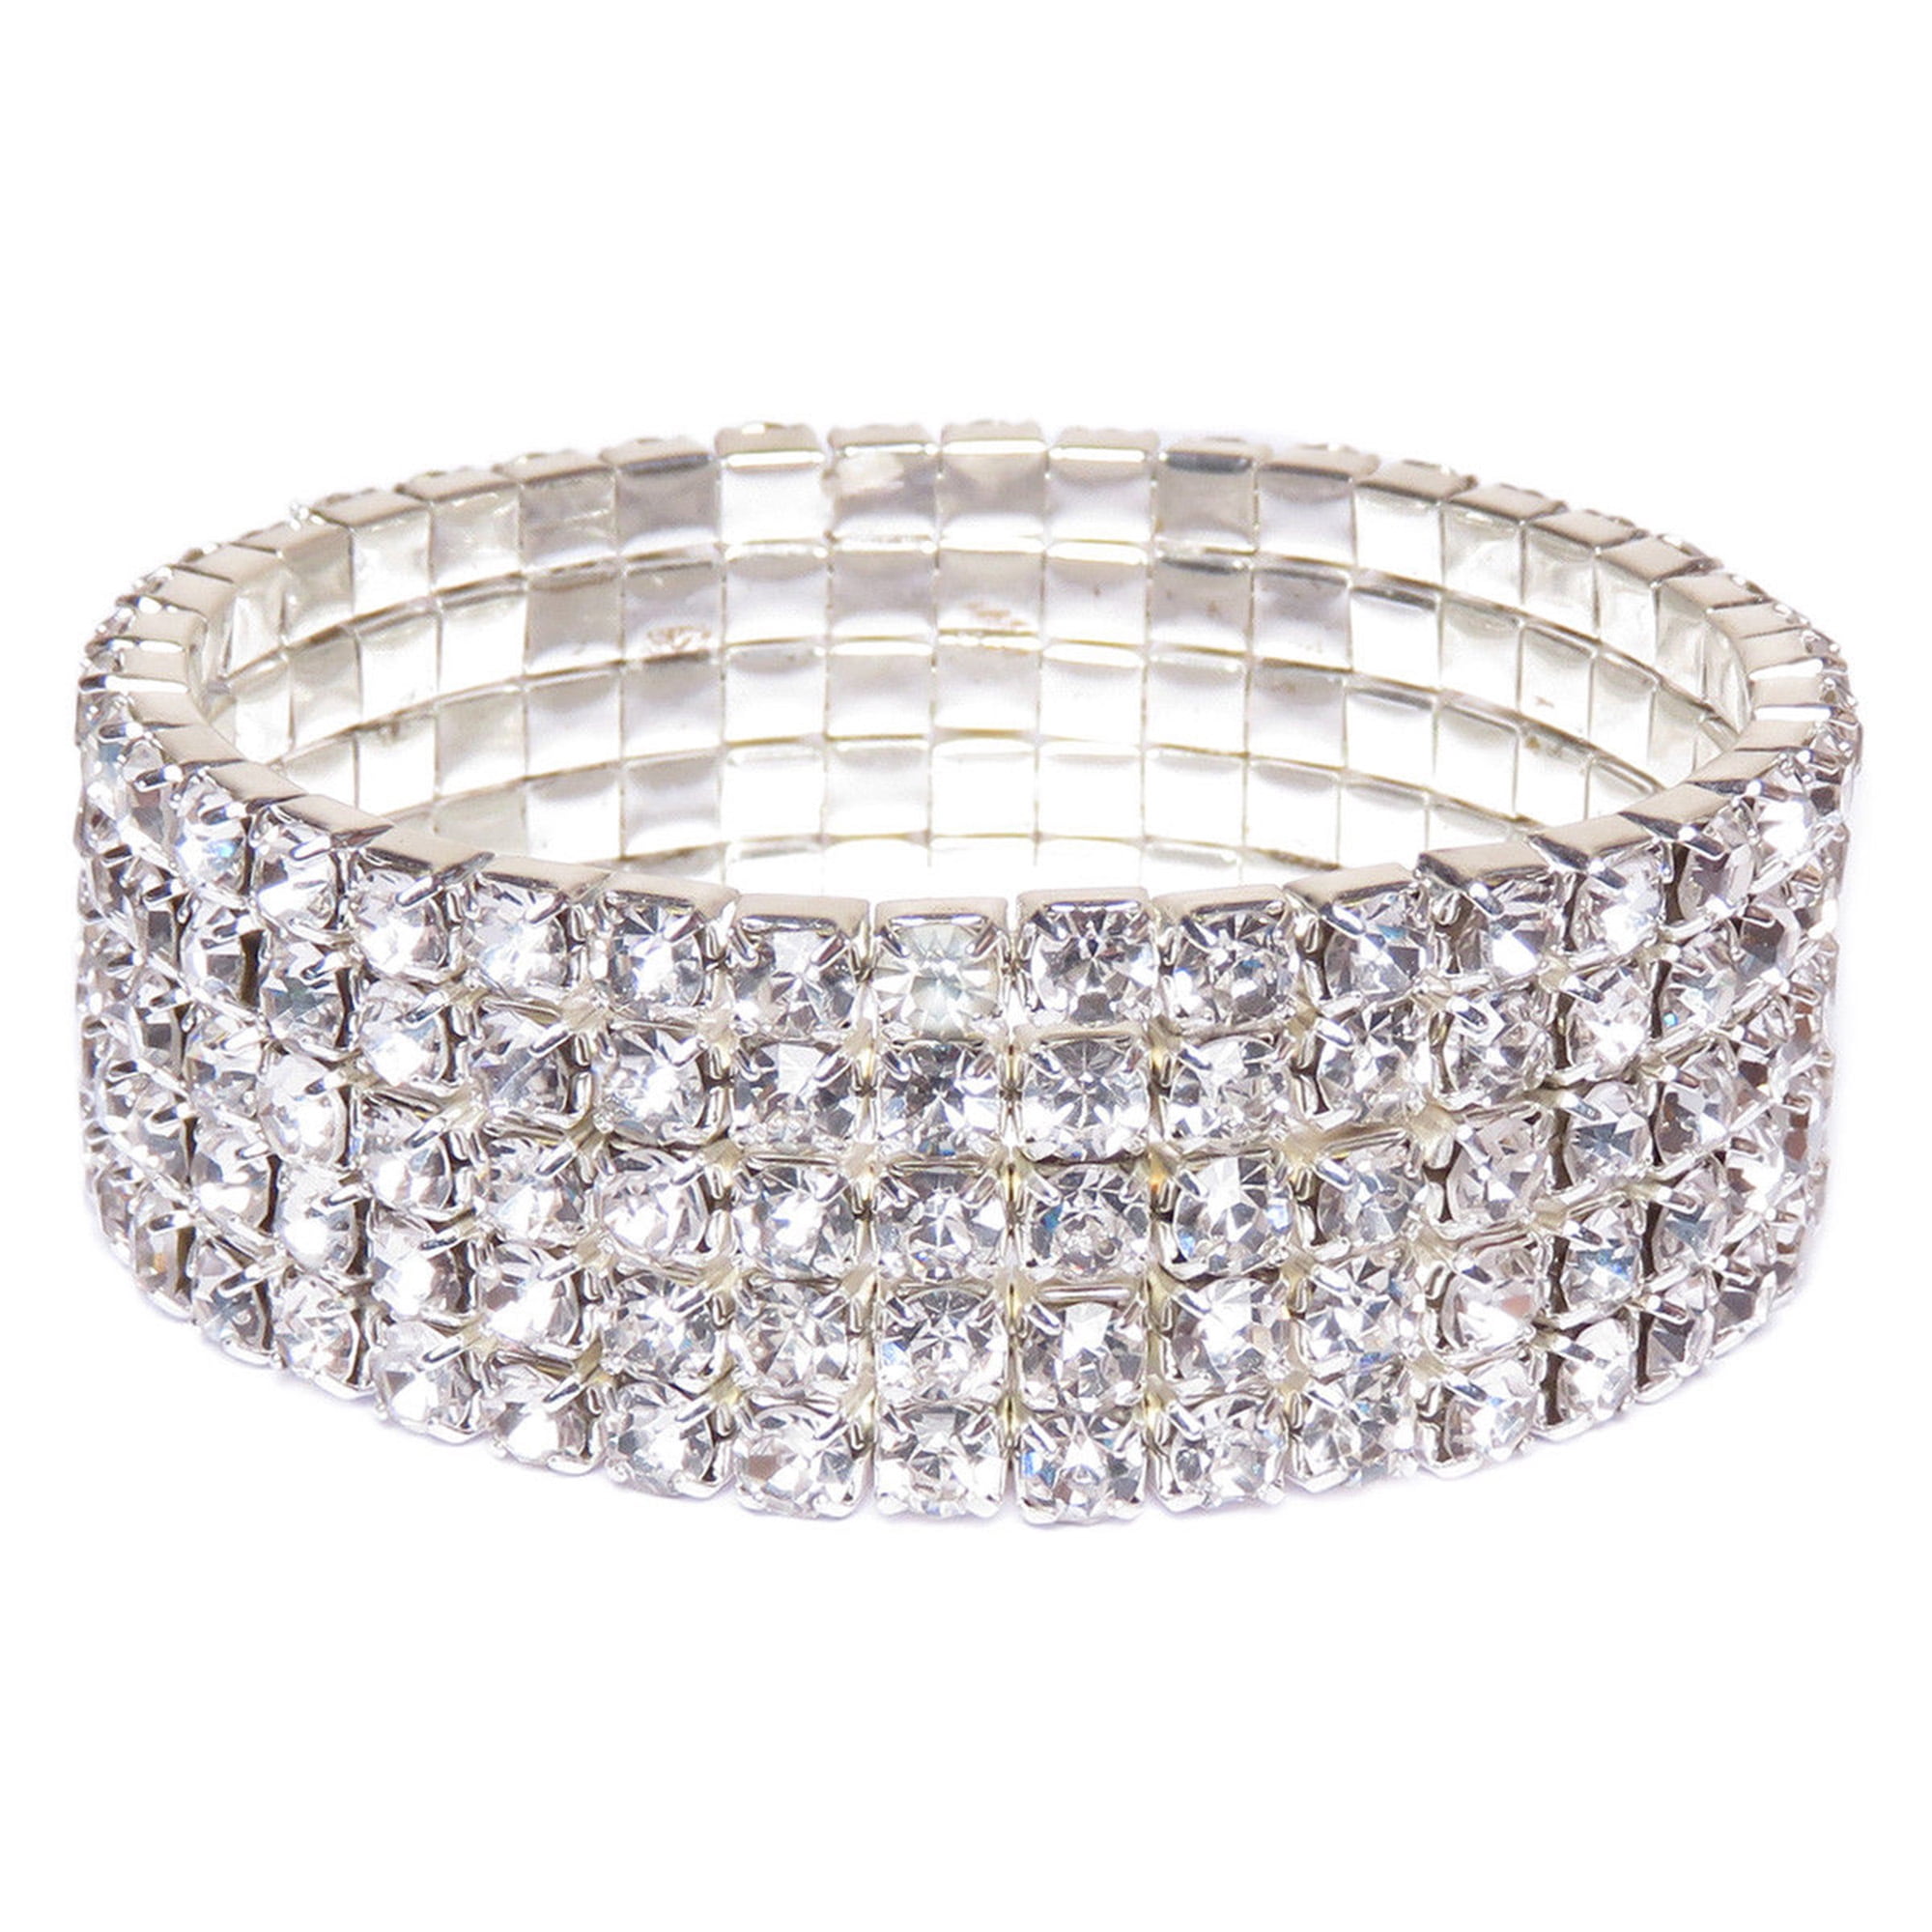 Slim Clear Crystal Stretch Bracelet In Silver Tone up to 17cm L/ Smal 